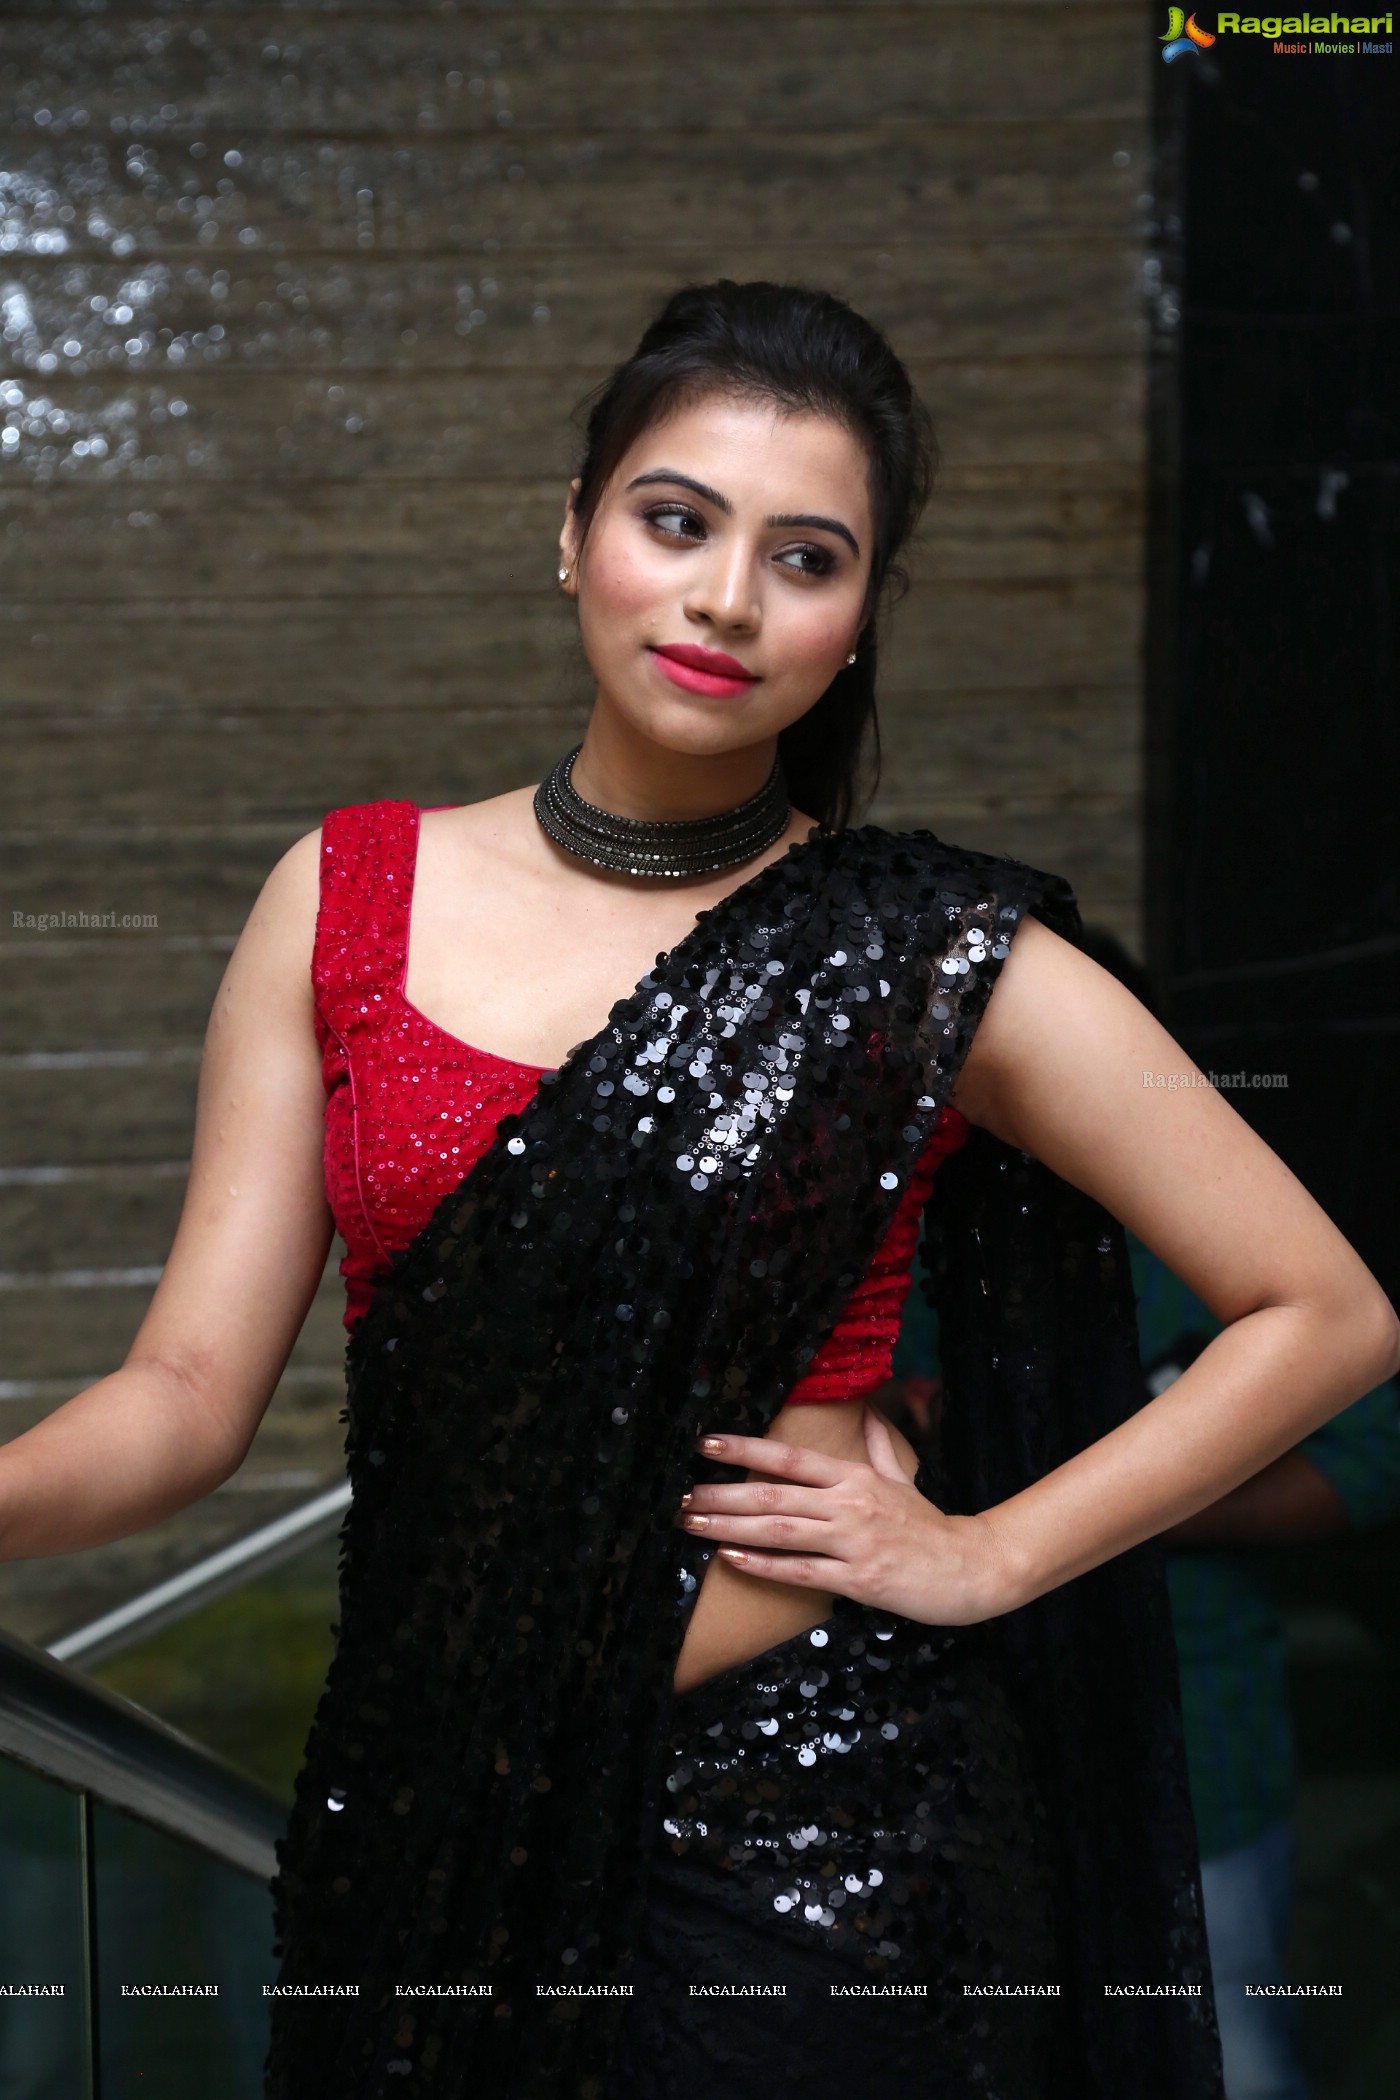 Priyanka Raman at Queens Lounge Event (Posters)